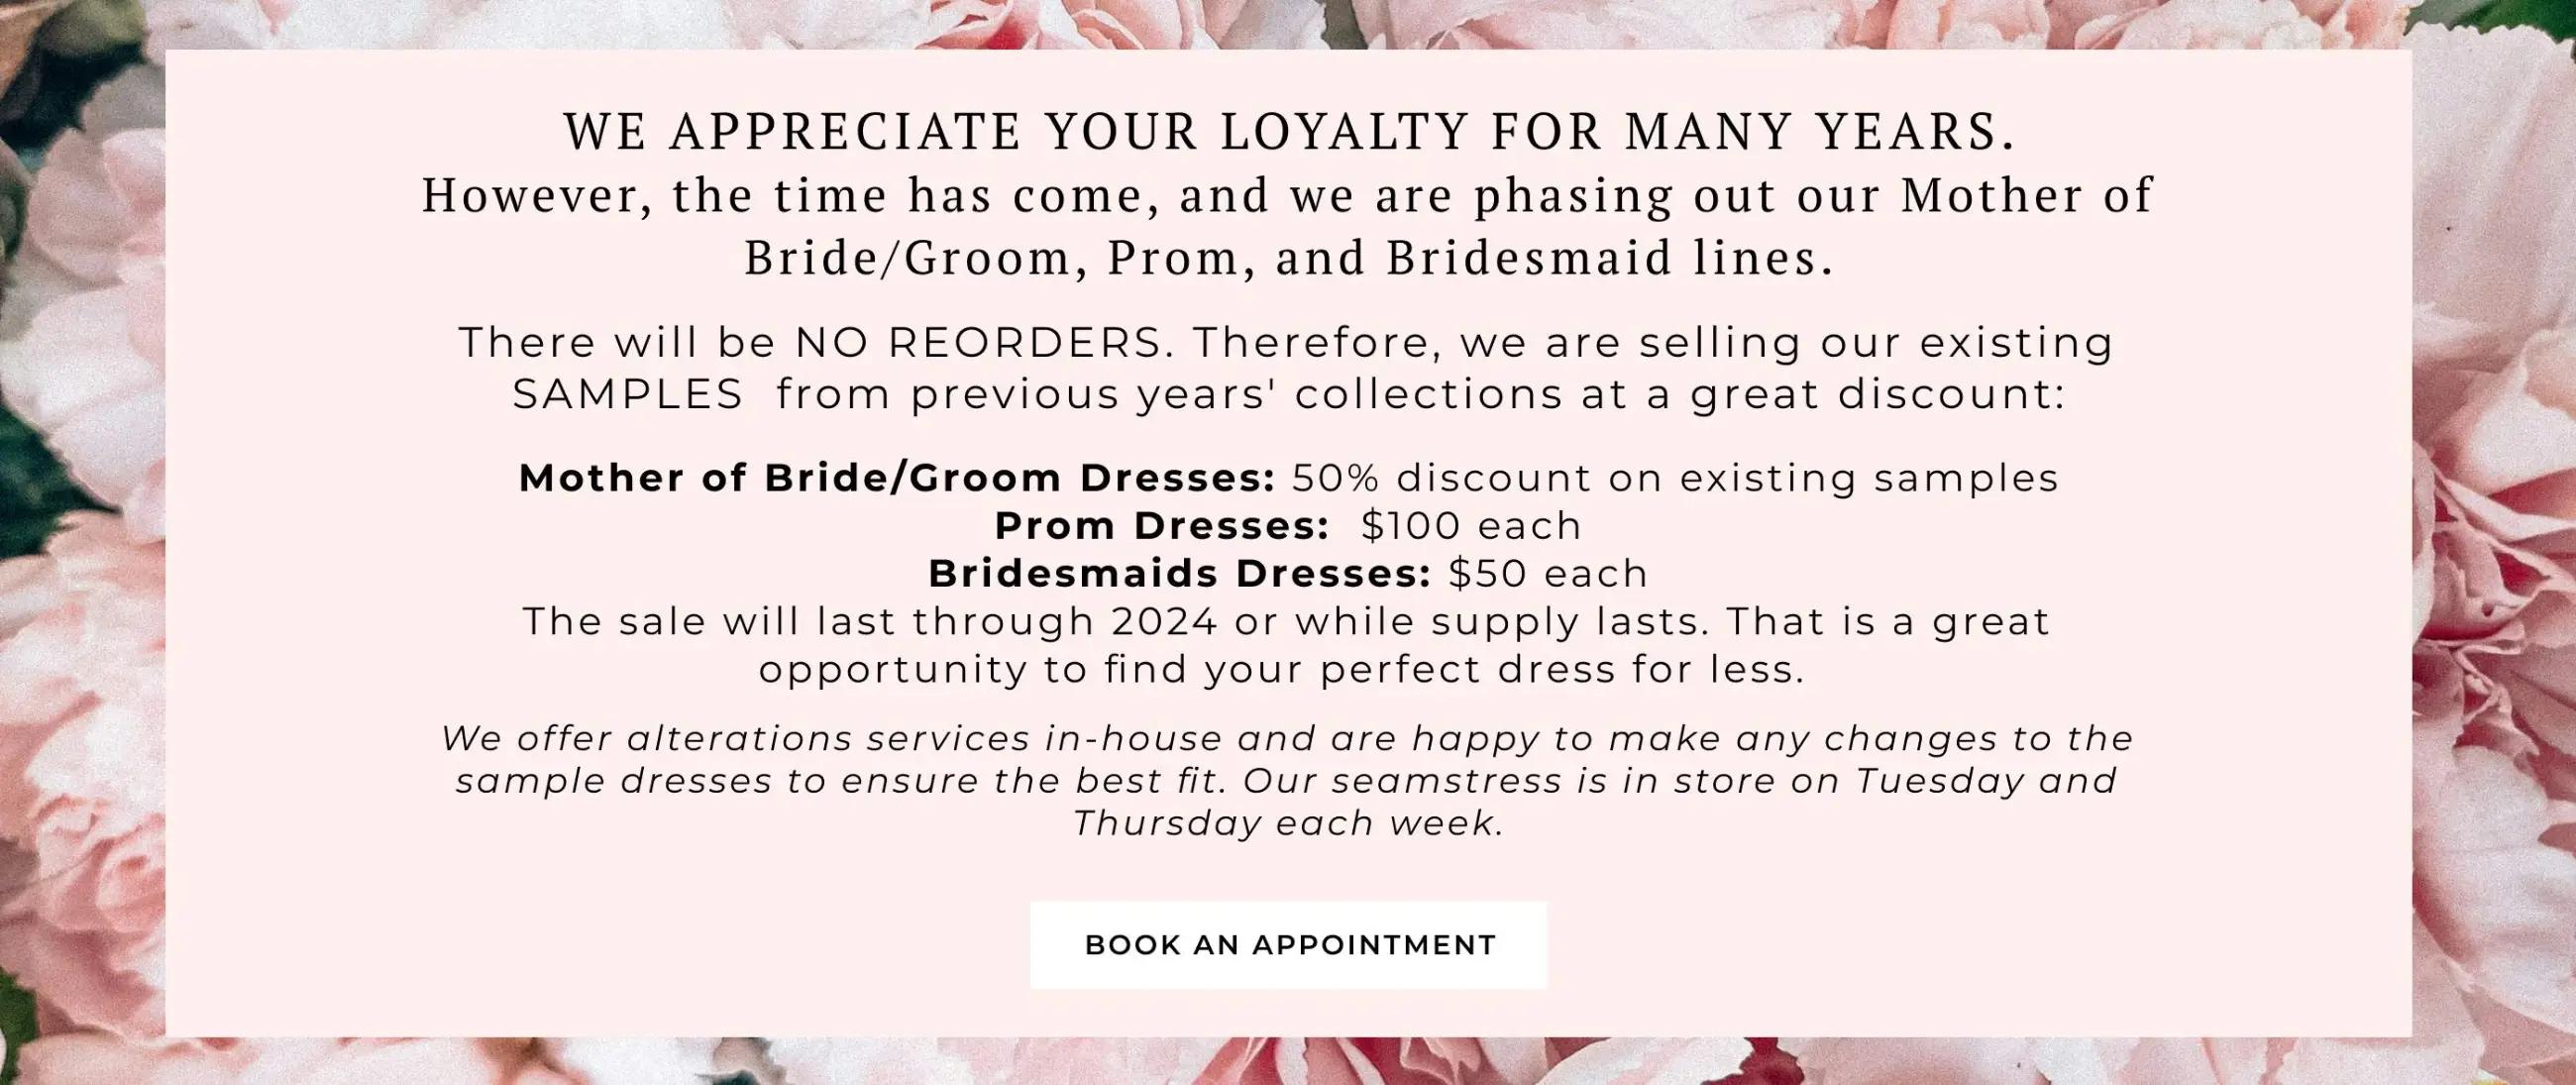 MOB/Bridesmaids/Prom promotion banner